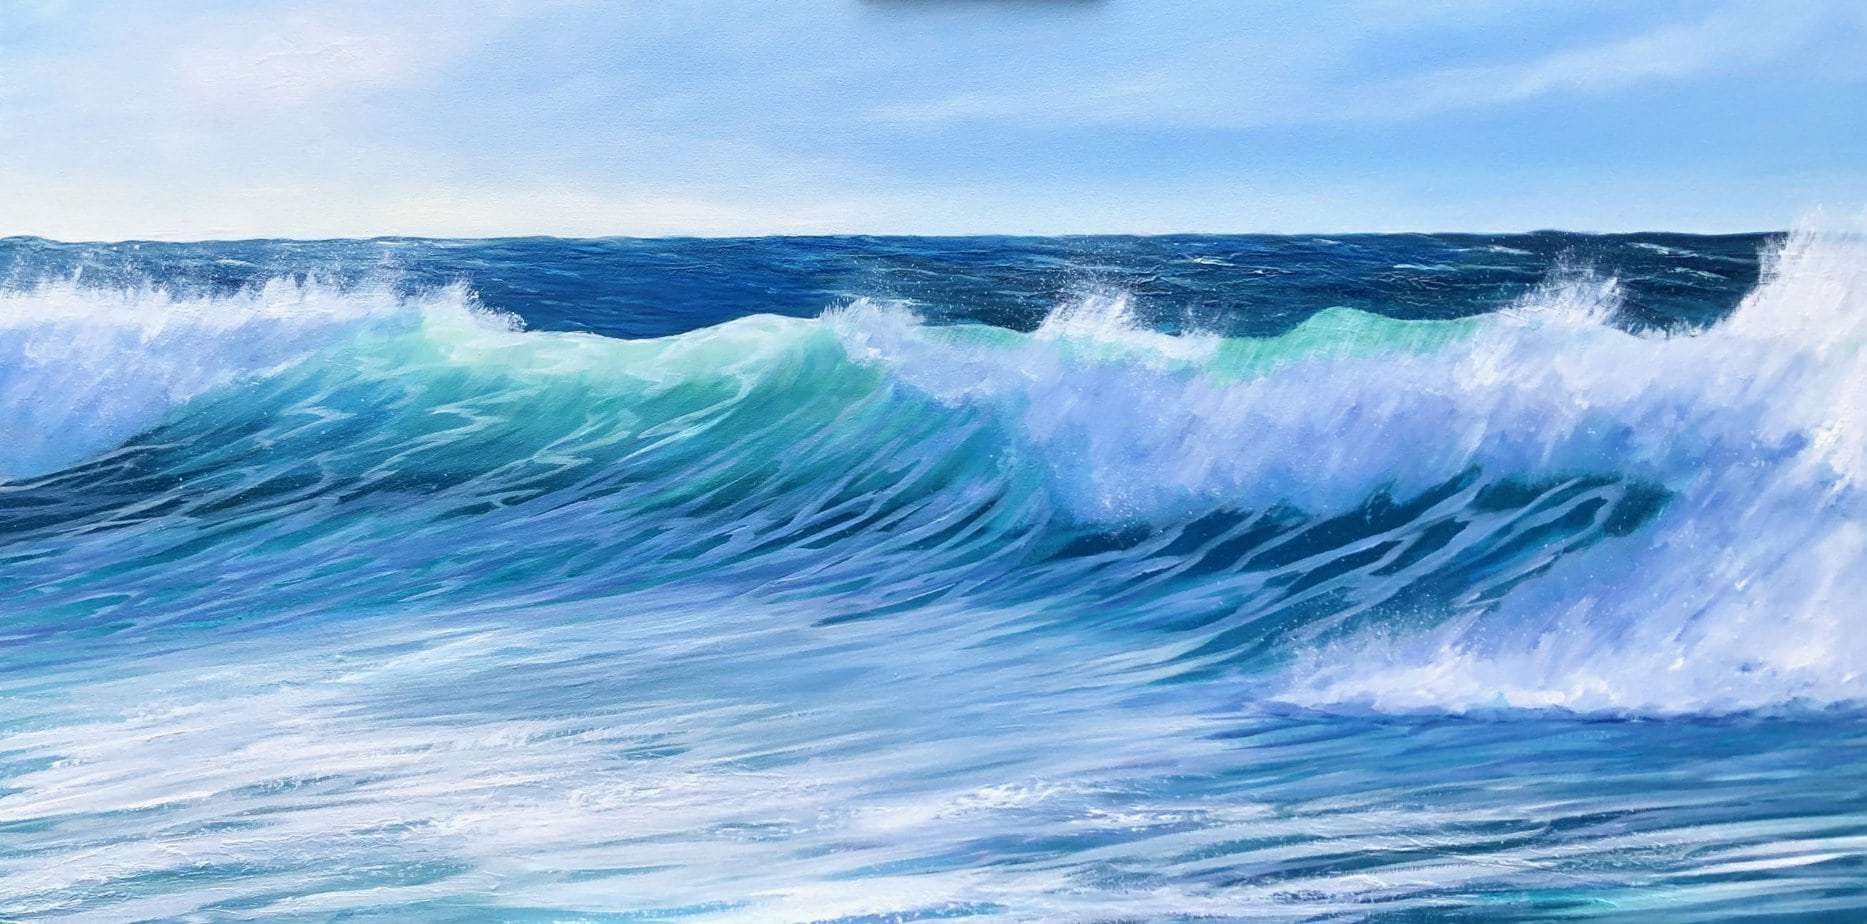 Crashing Waves giclee print available in 2 sizes for sale in my online art gallery